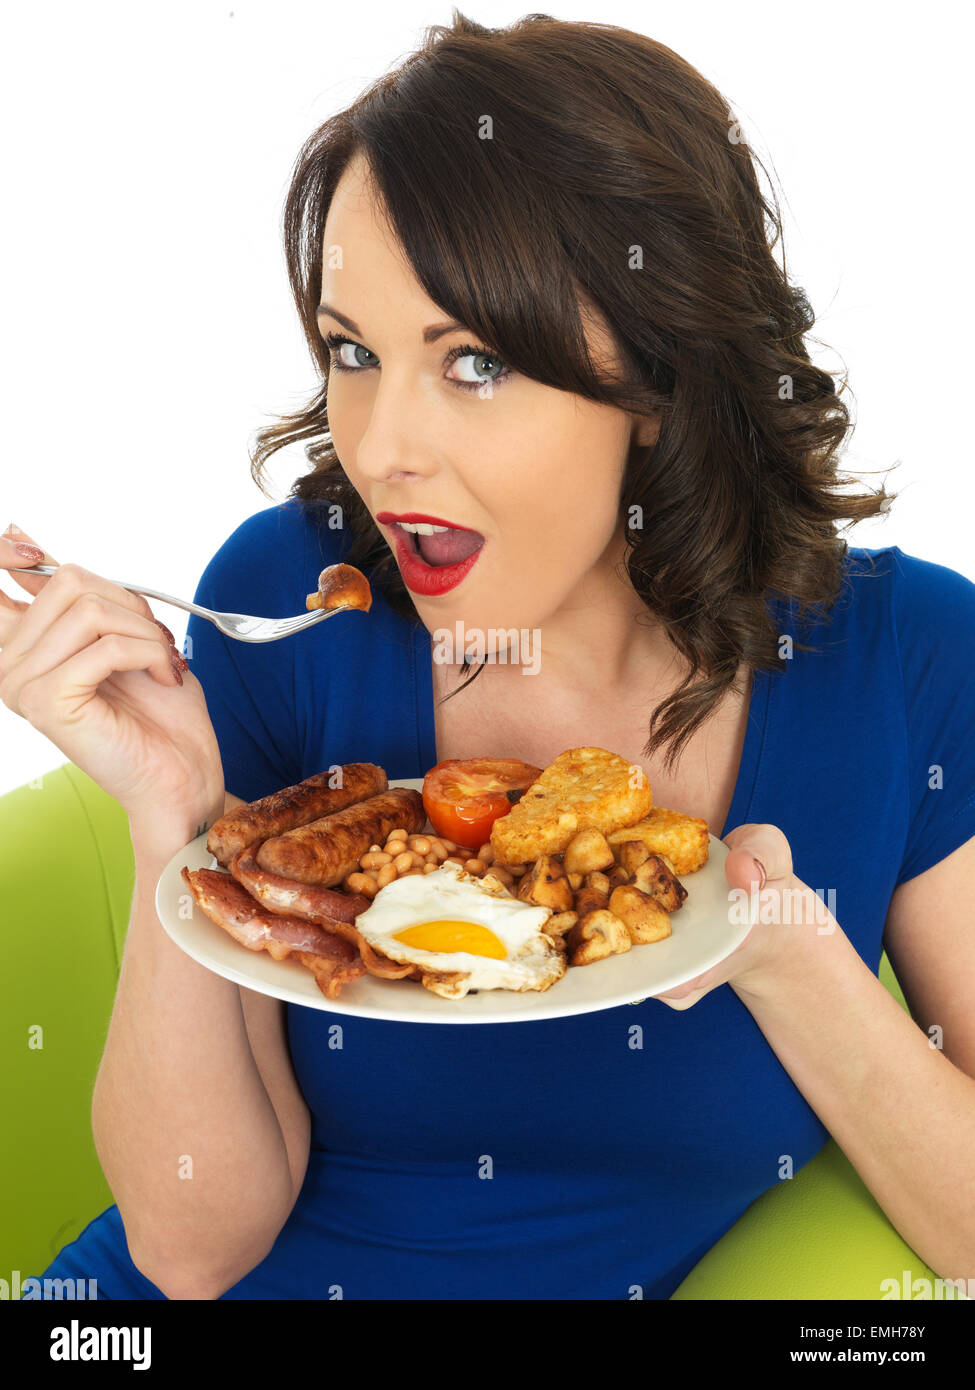 Stock Photo - Young Attractive Woman Eating a <b>Full English</b> Breakfast - young-attractive-woman-eating-a-full-english-breakfast-EMH78Y